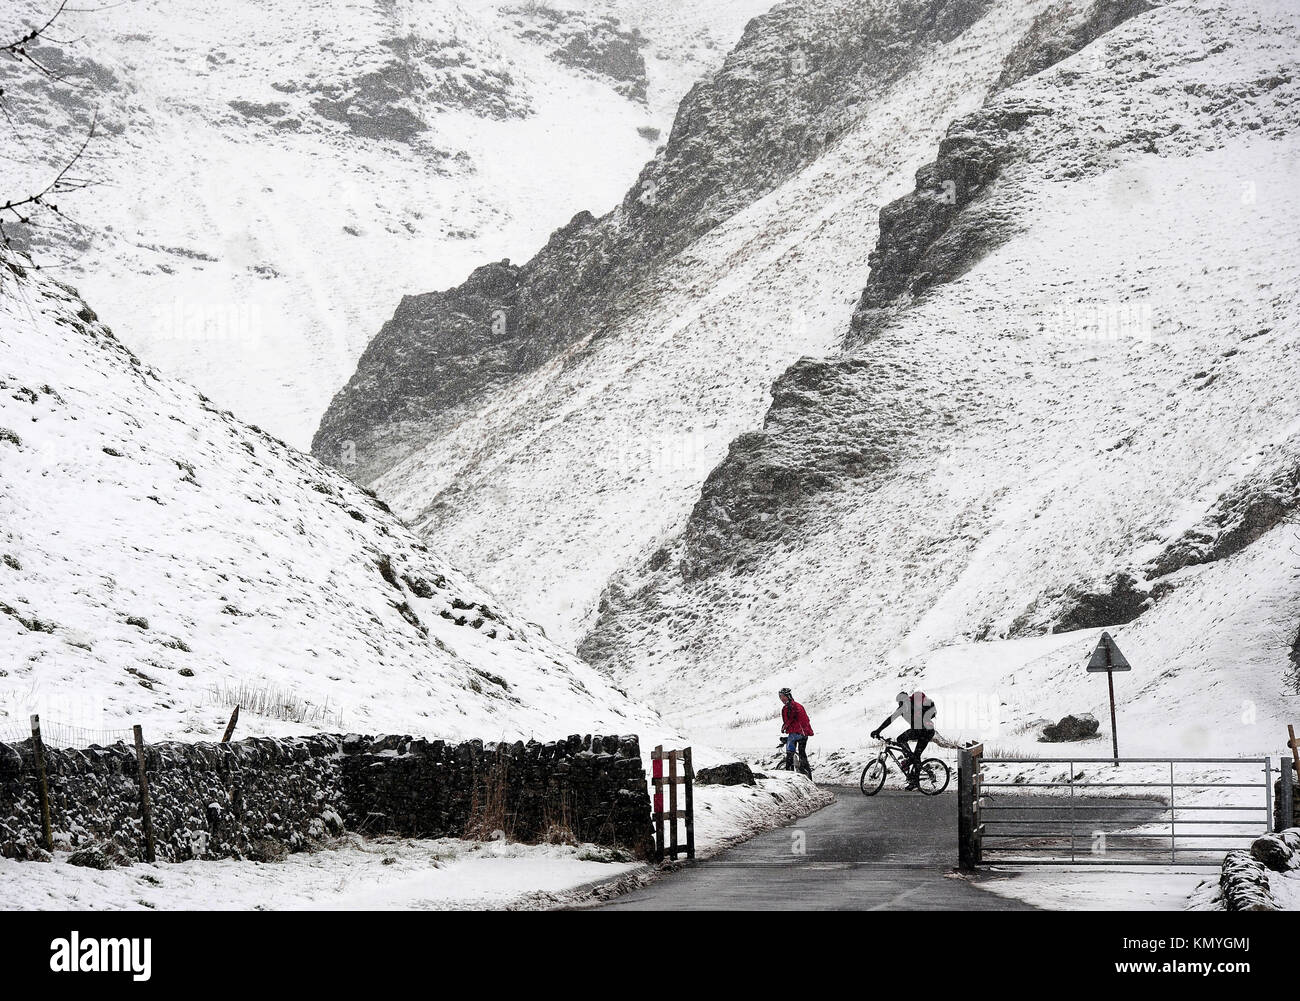 Cyclists at Winnats Pass in the Peak District, as widespread disruption is expected as snow continues to fall across large parts of the UK, with forecasters warning some communities could be cut off as temperatures plummet. Stock Photo